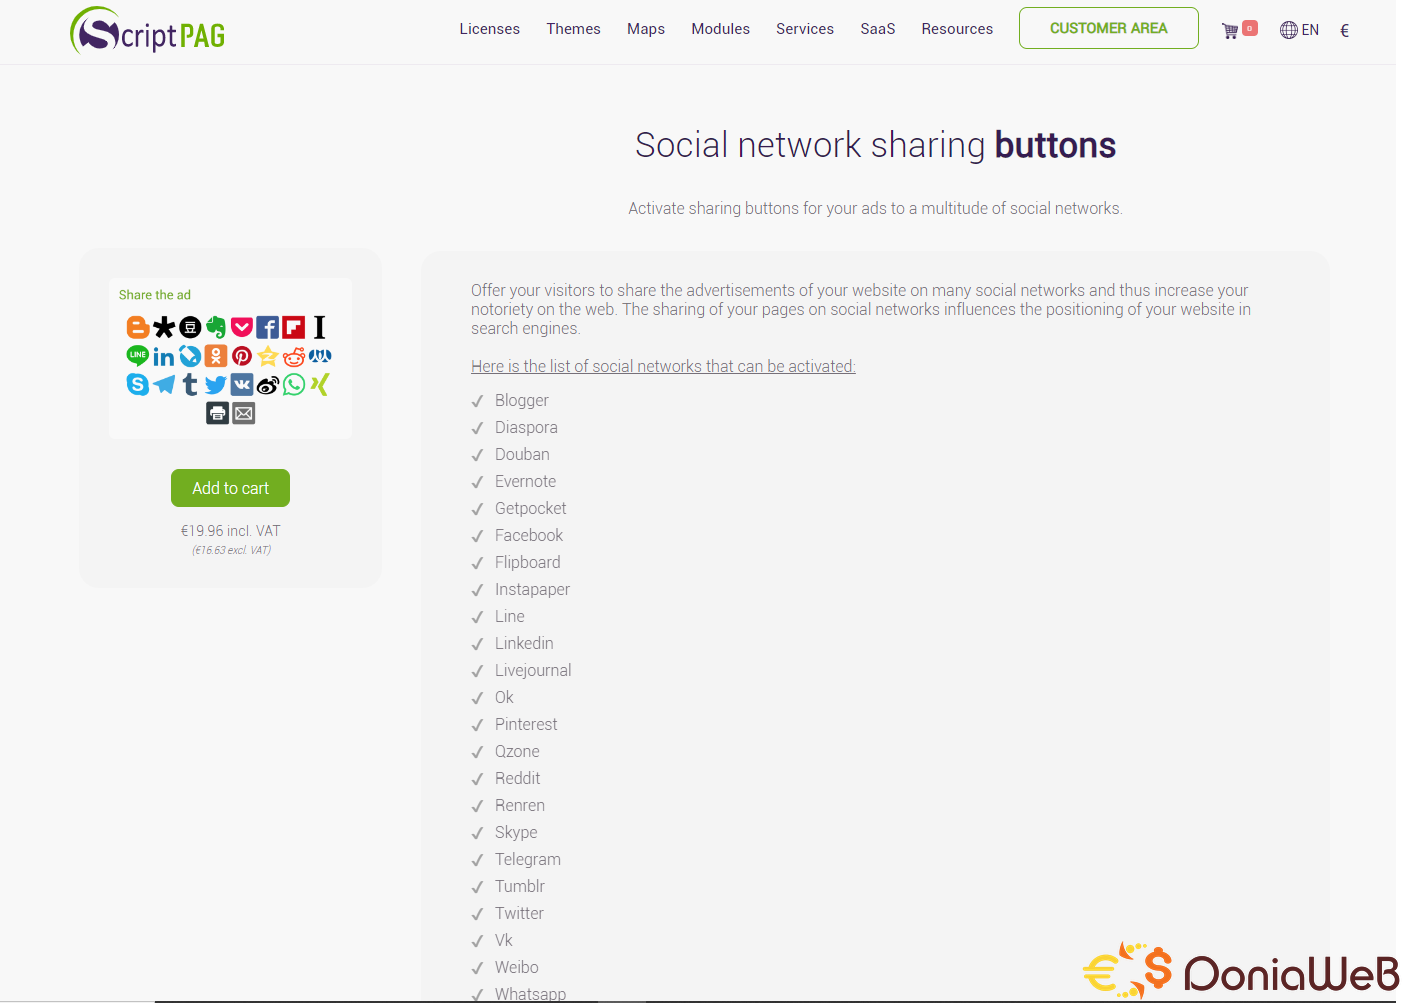 Module script pag "Social network sharing buttons"